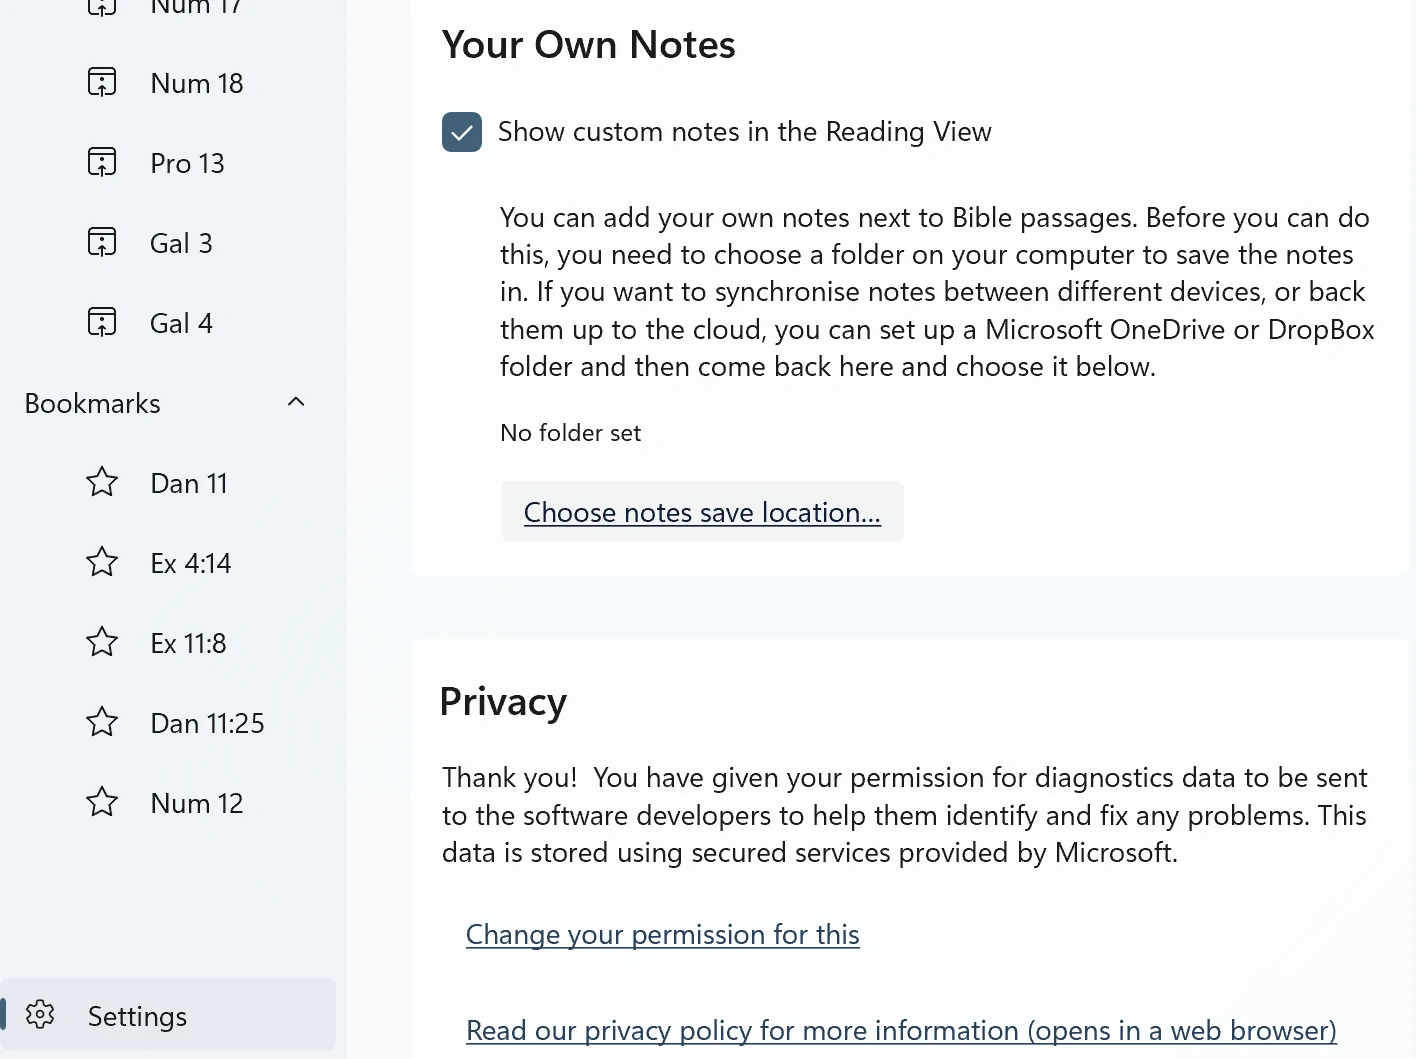 Your Own Notes section of Settings